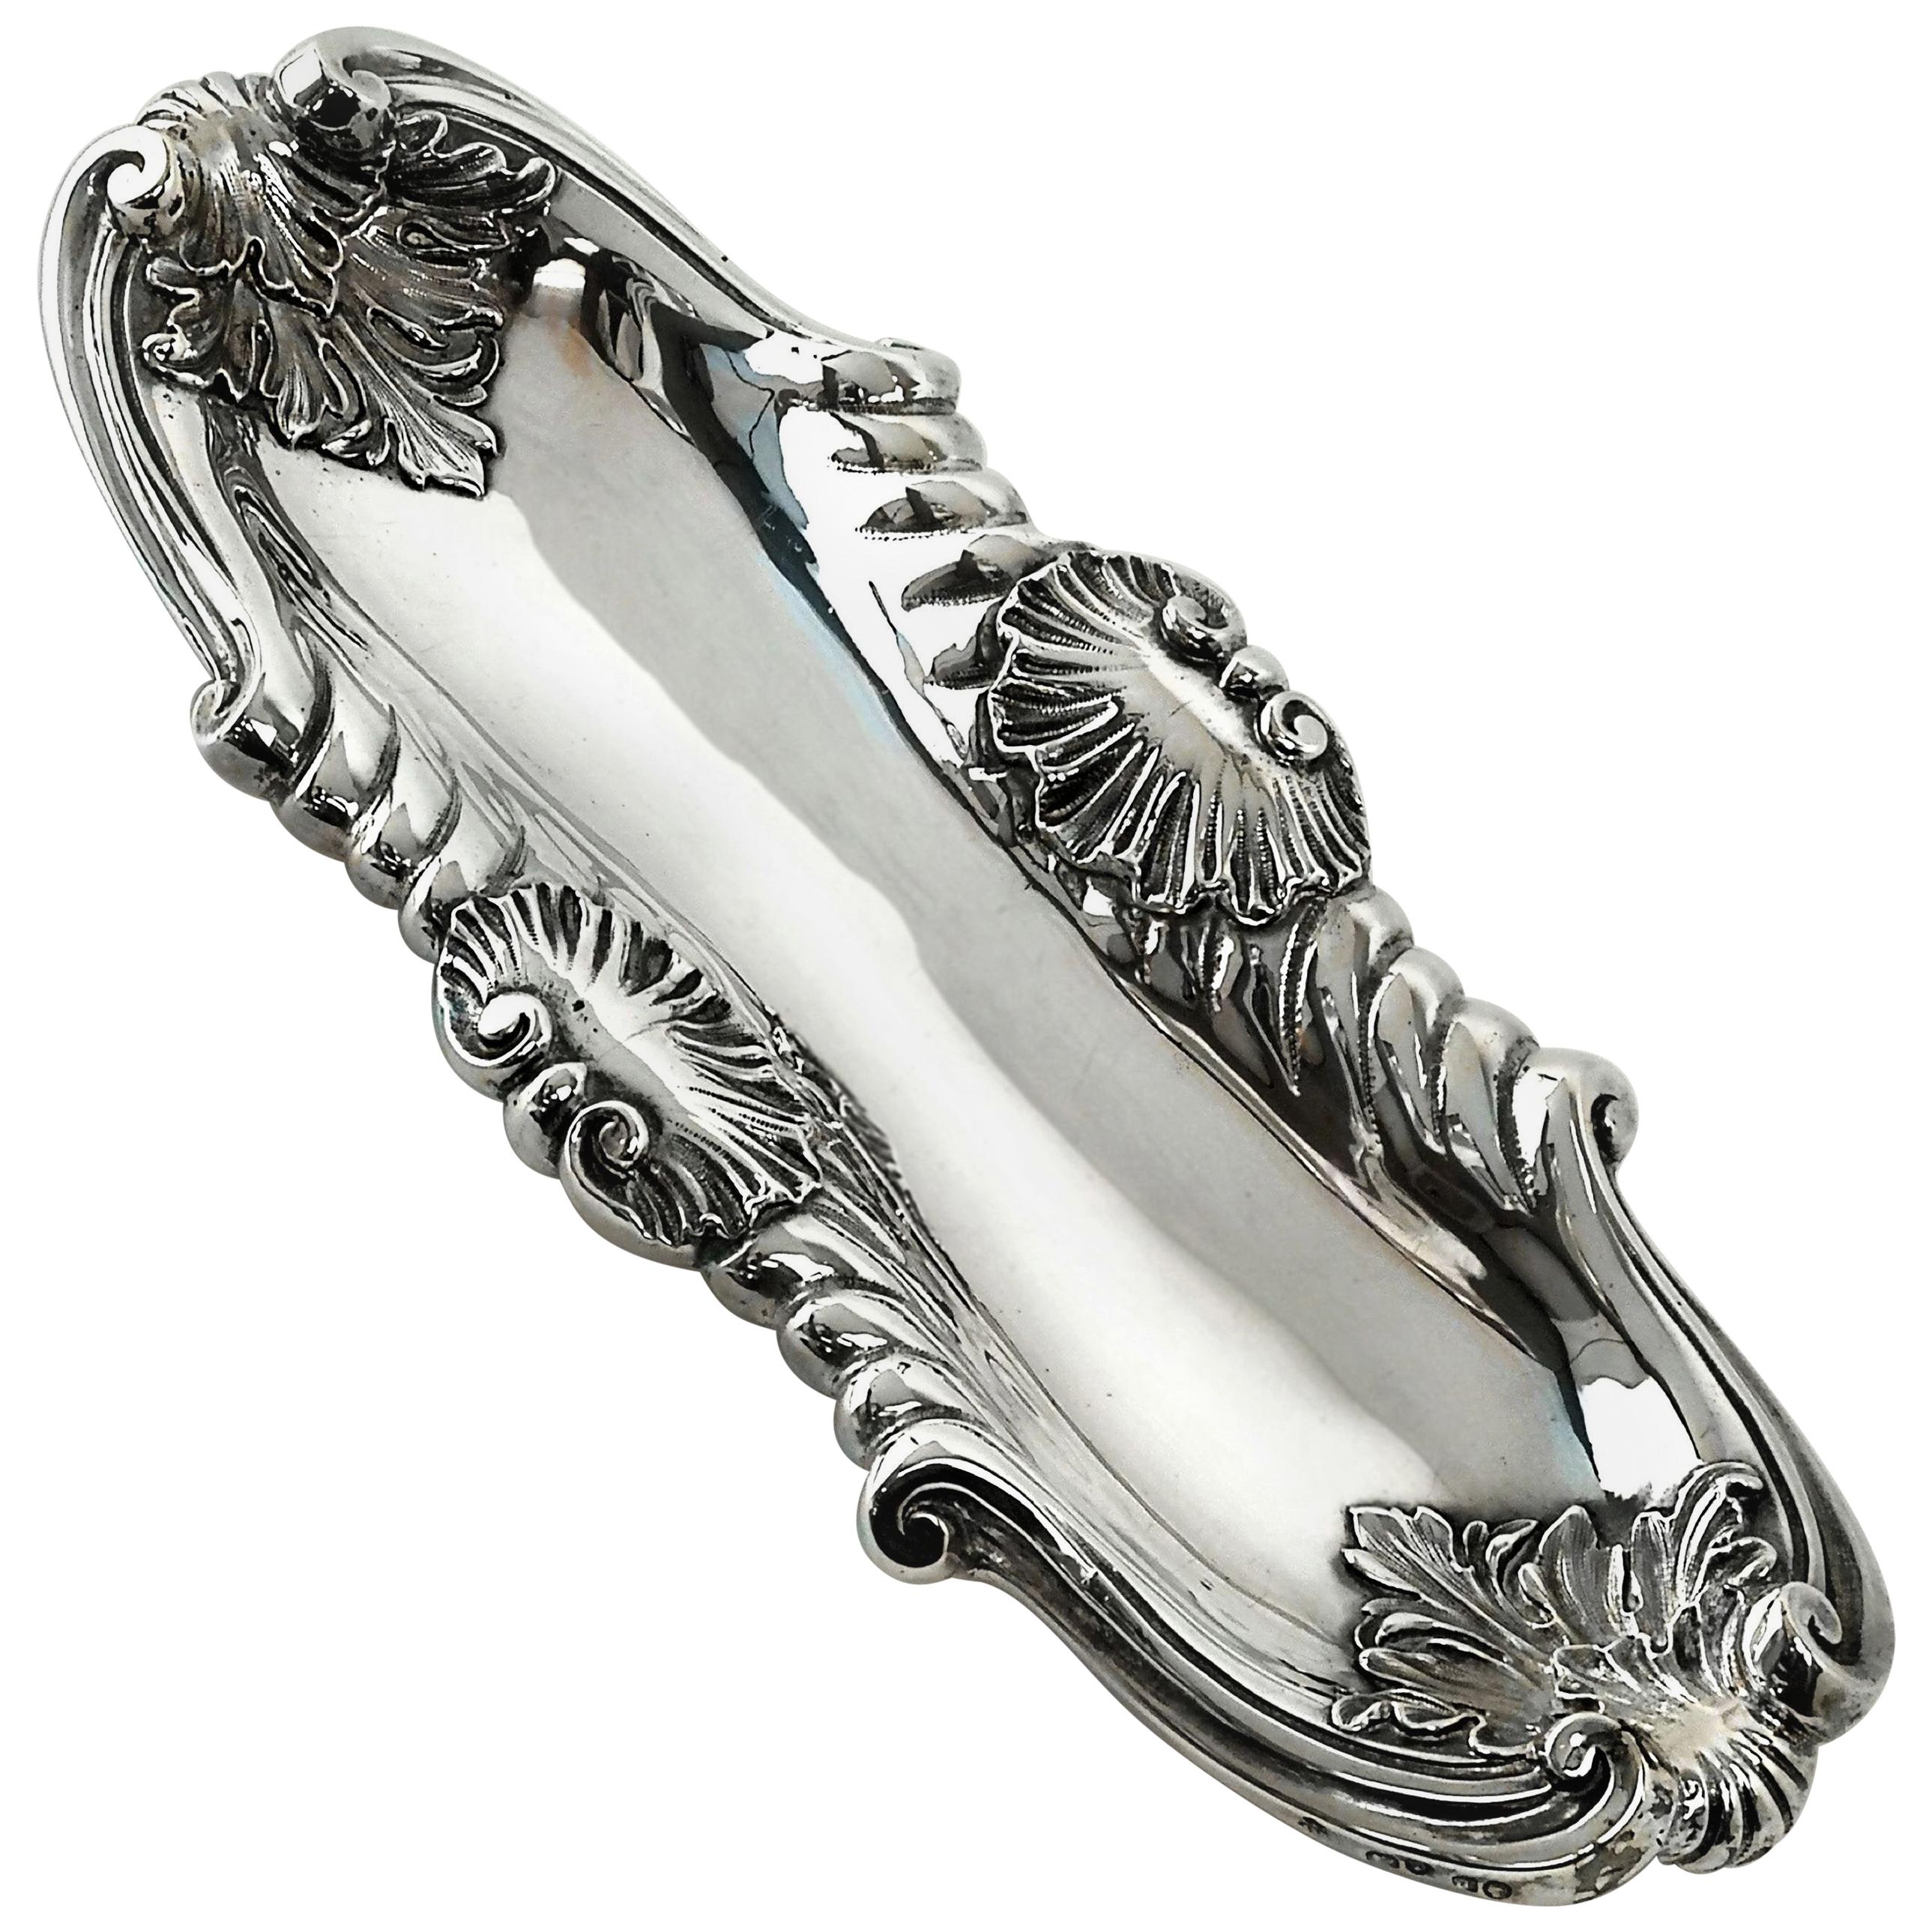 Antique Victorian Solid Silver Pen Tray / Pin Tray London, 1854